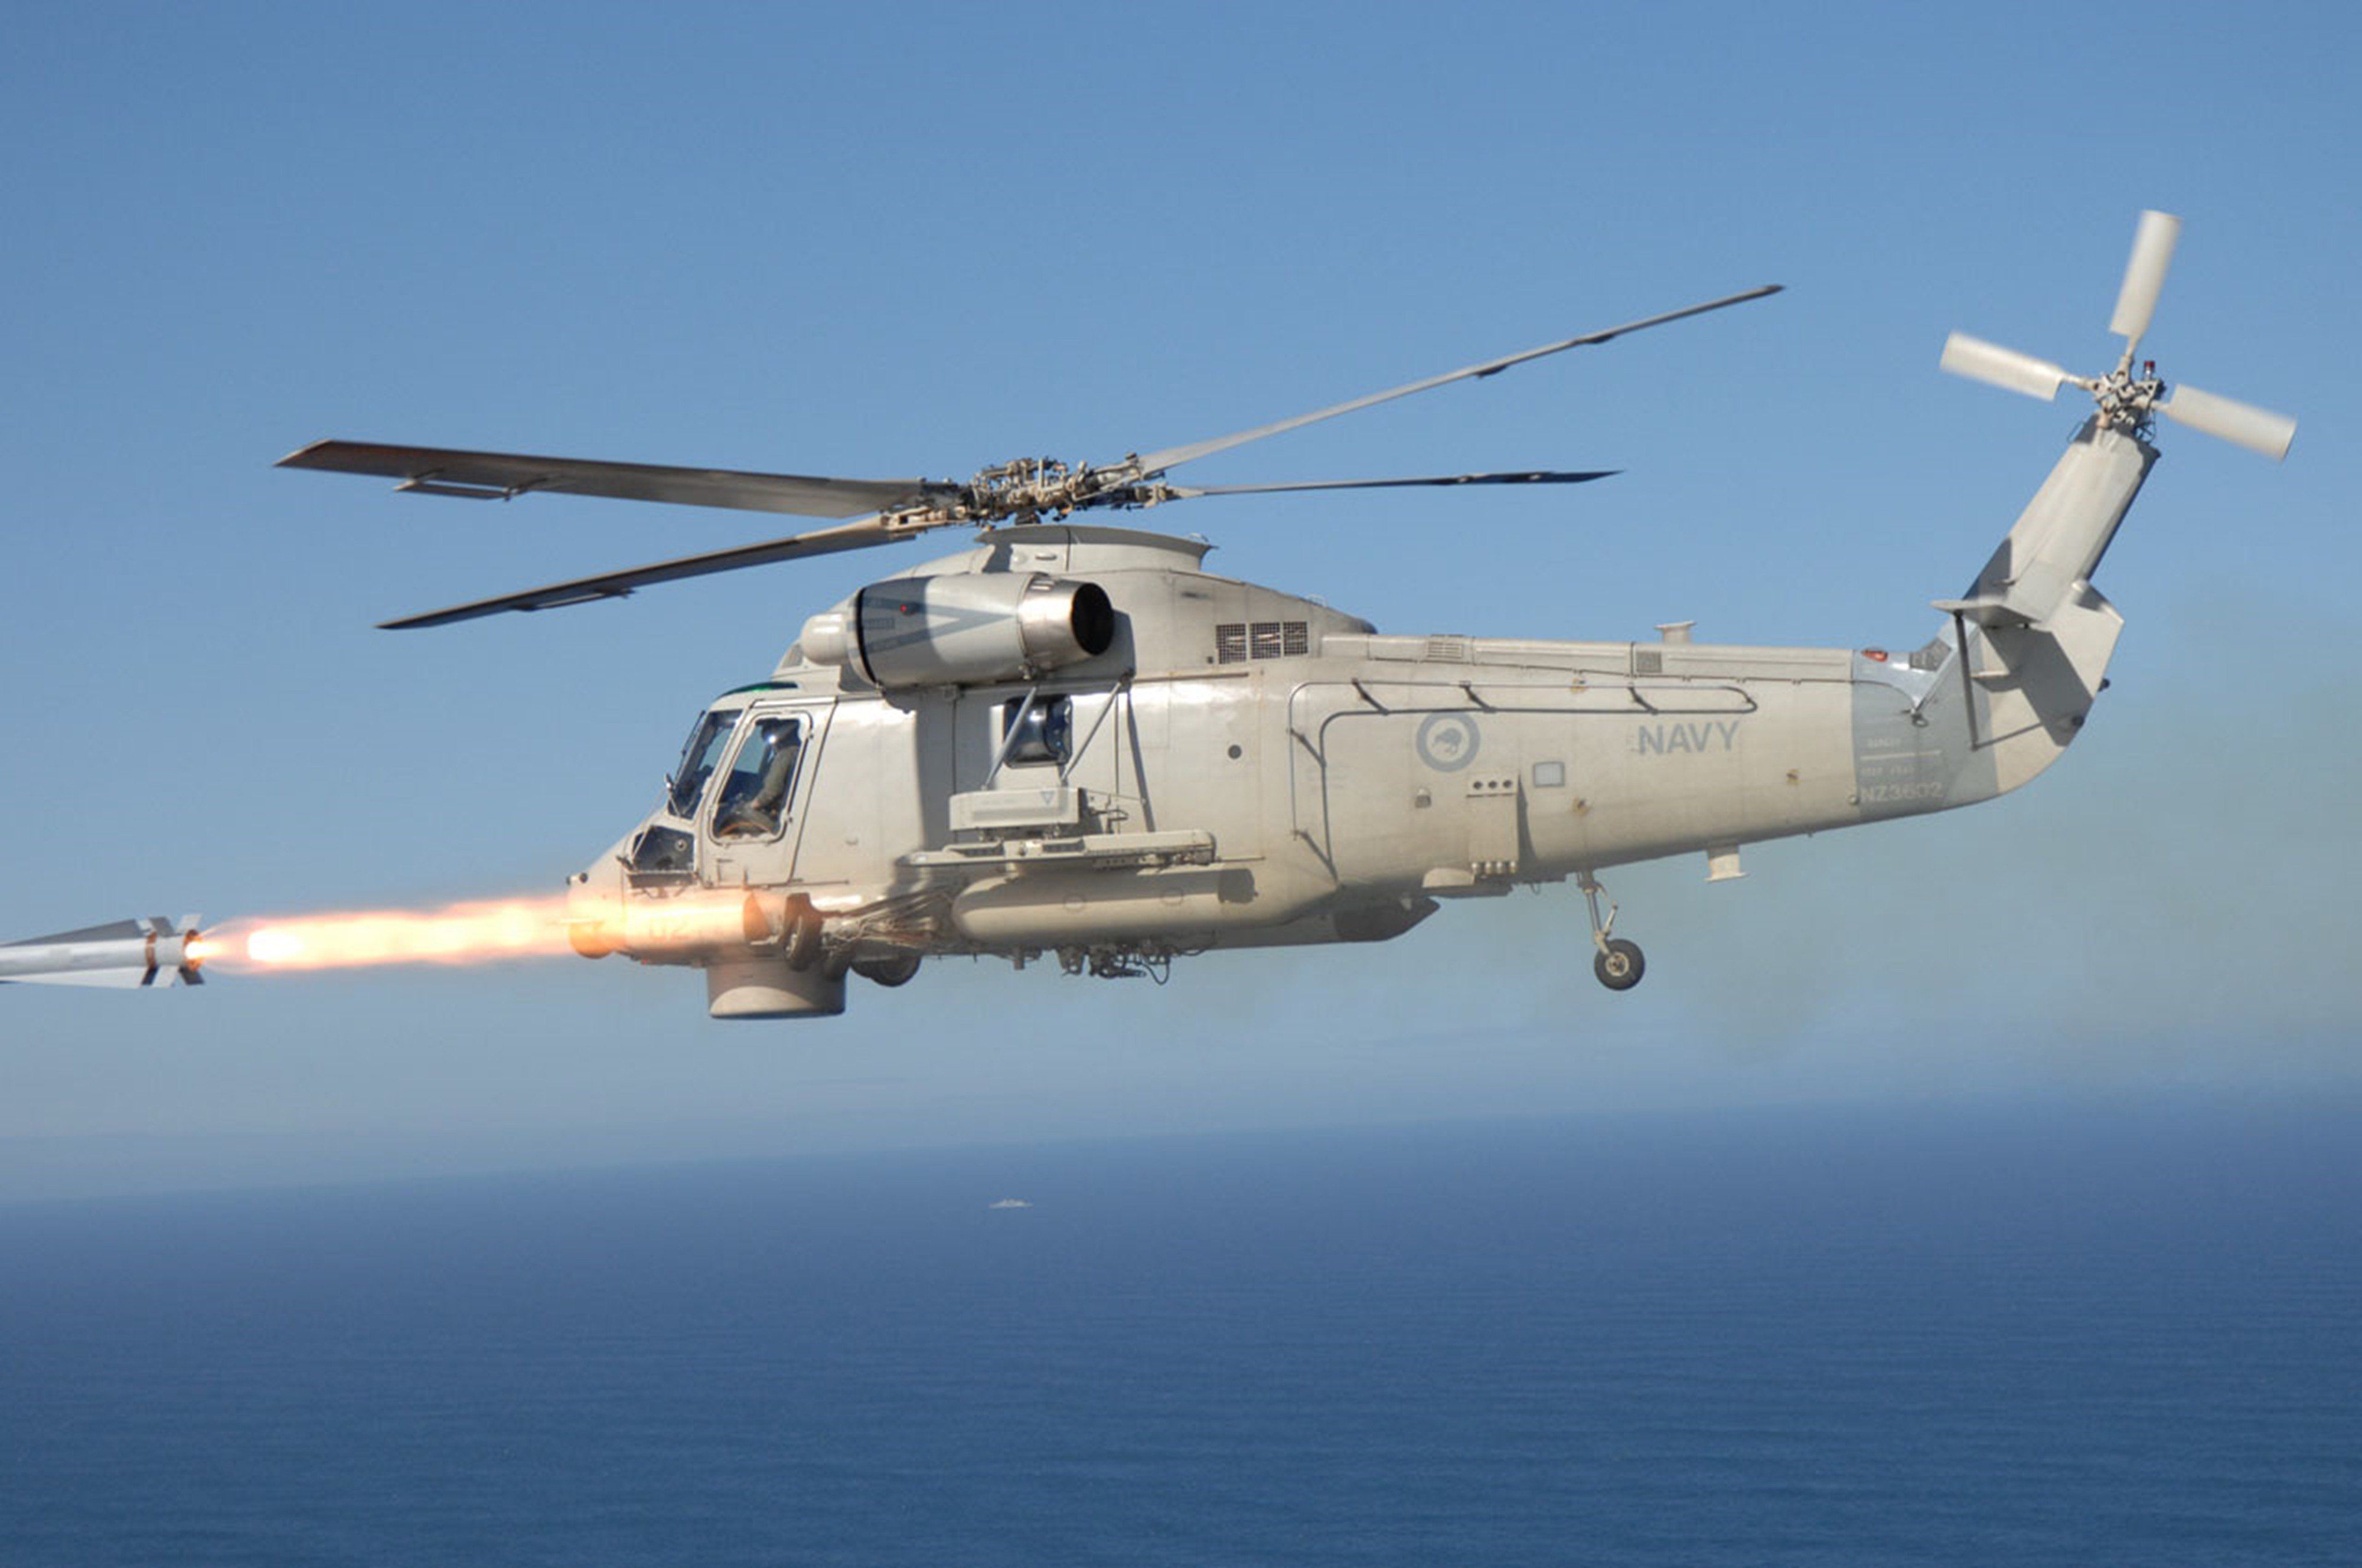 Helicopter Aircraft Military Navy Missile Maverick 1 4000x2656 Wallpaperx2656. Aircraft, Military Aircraft, Navy Military